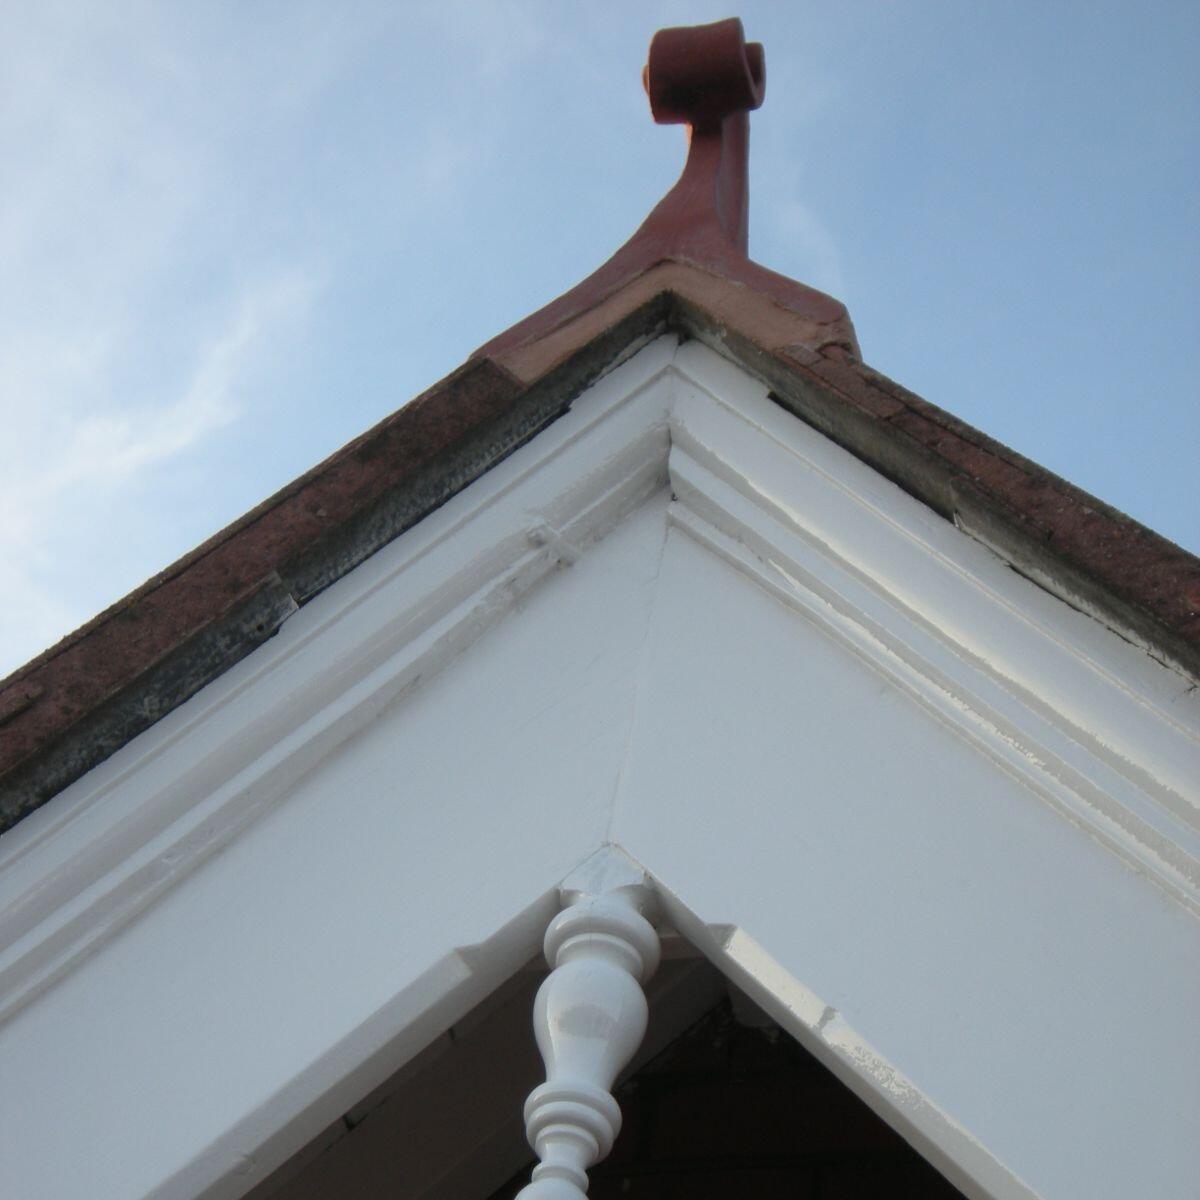 Small swan neck roof finial installed on a gable end